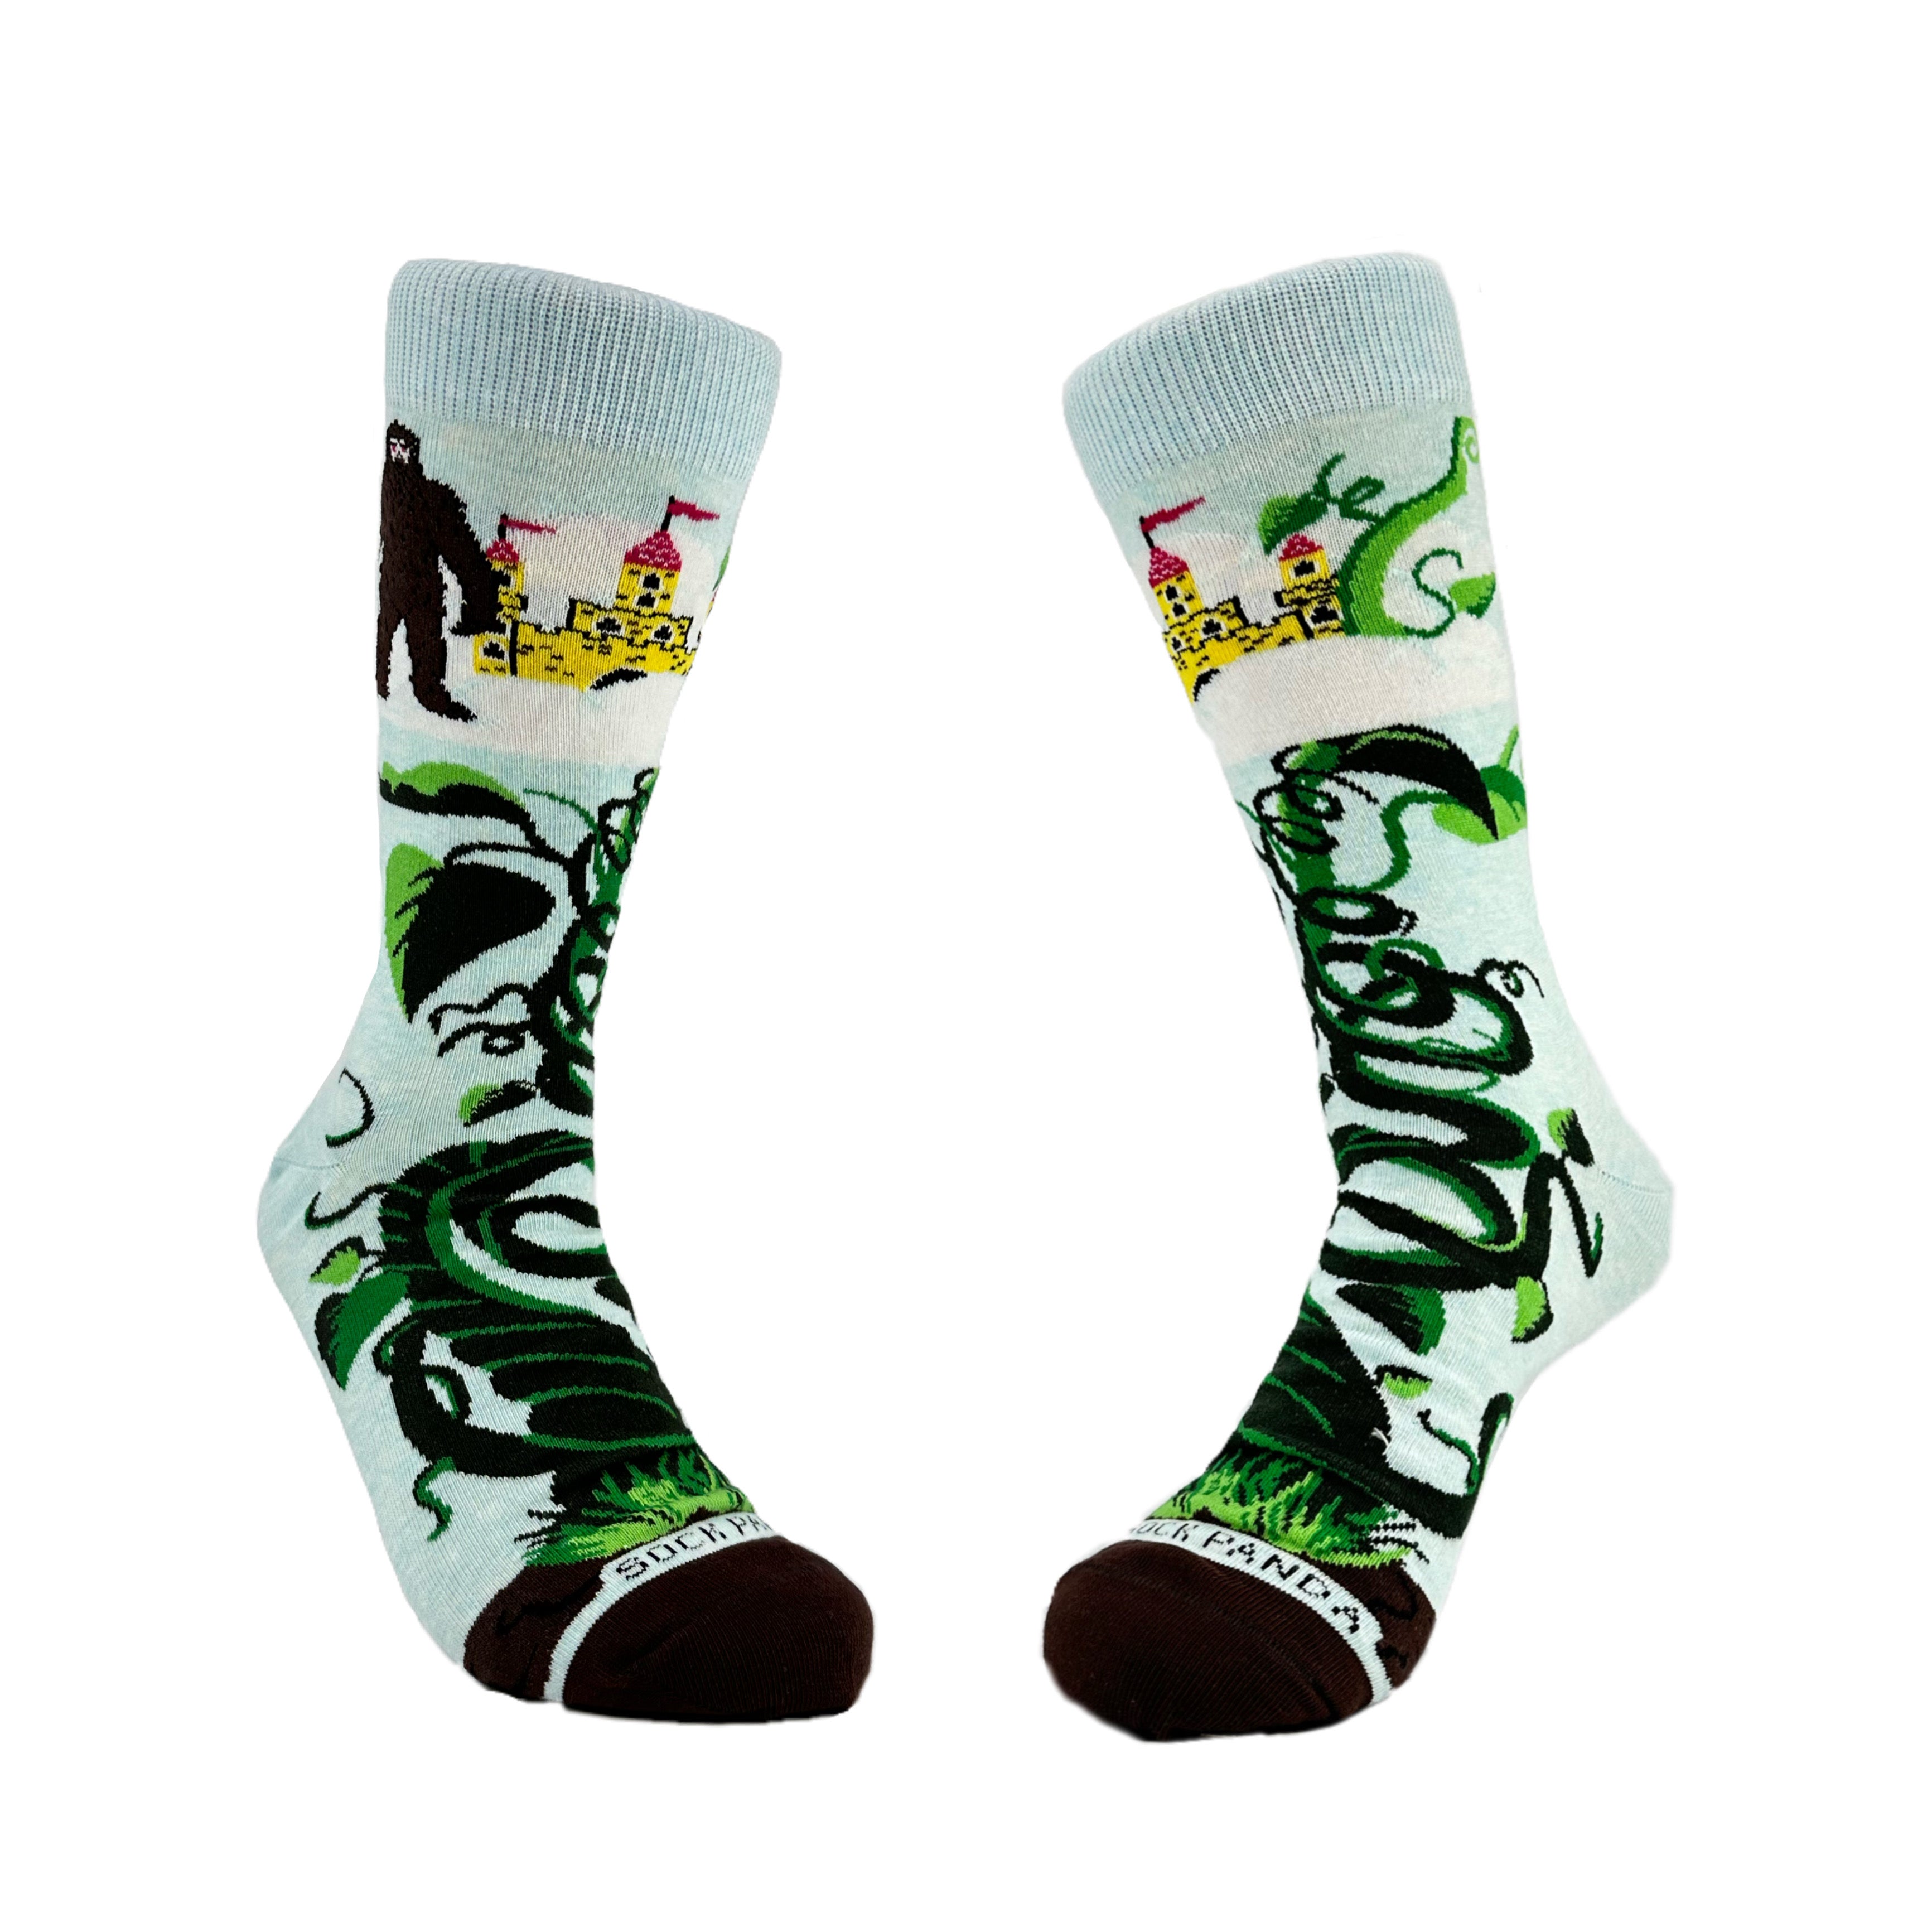 Bigfoot and the Beanstalk Socks from the Sock Panda (Adult Large)